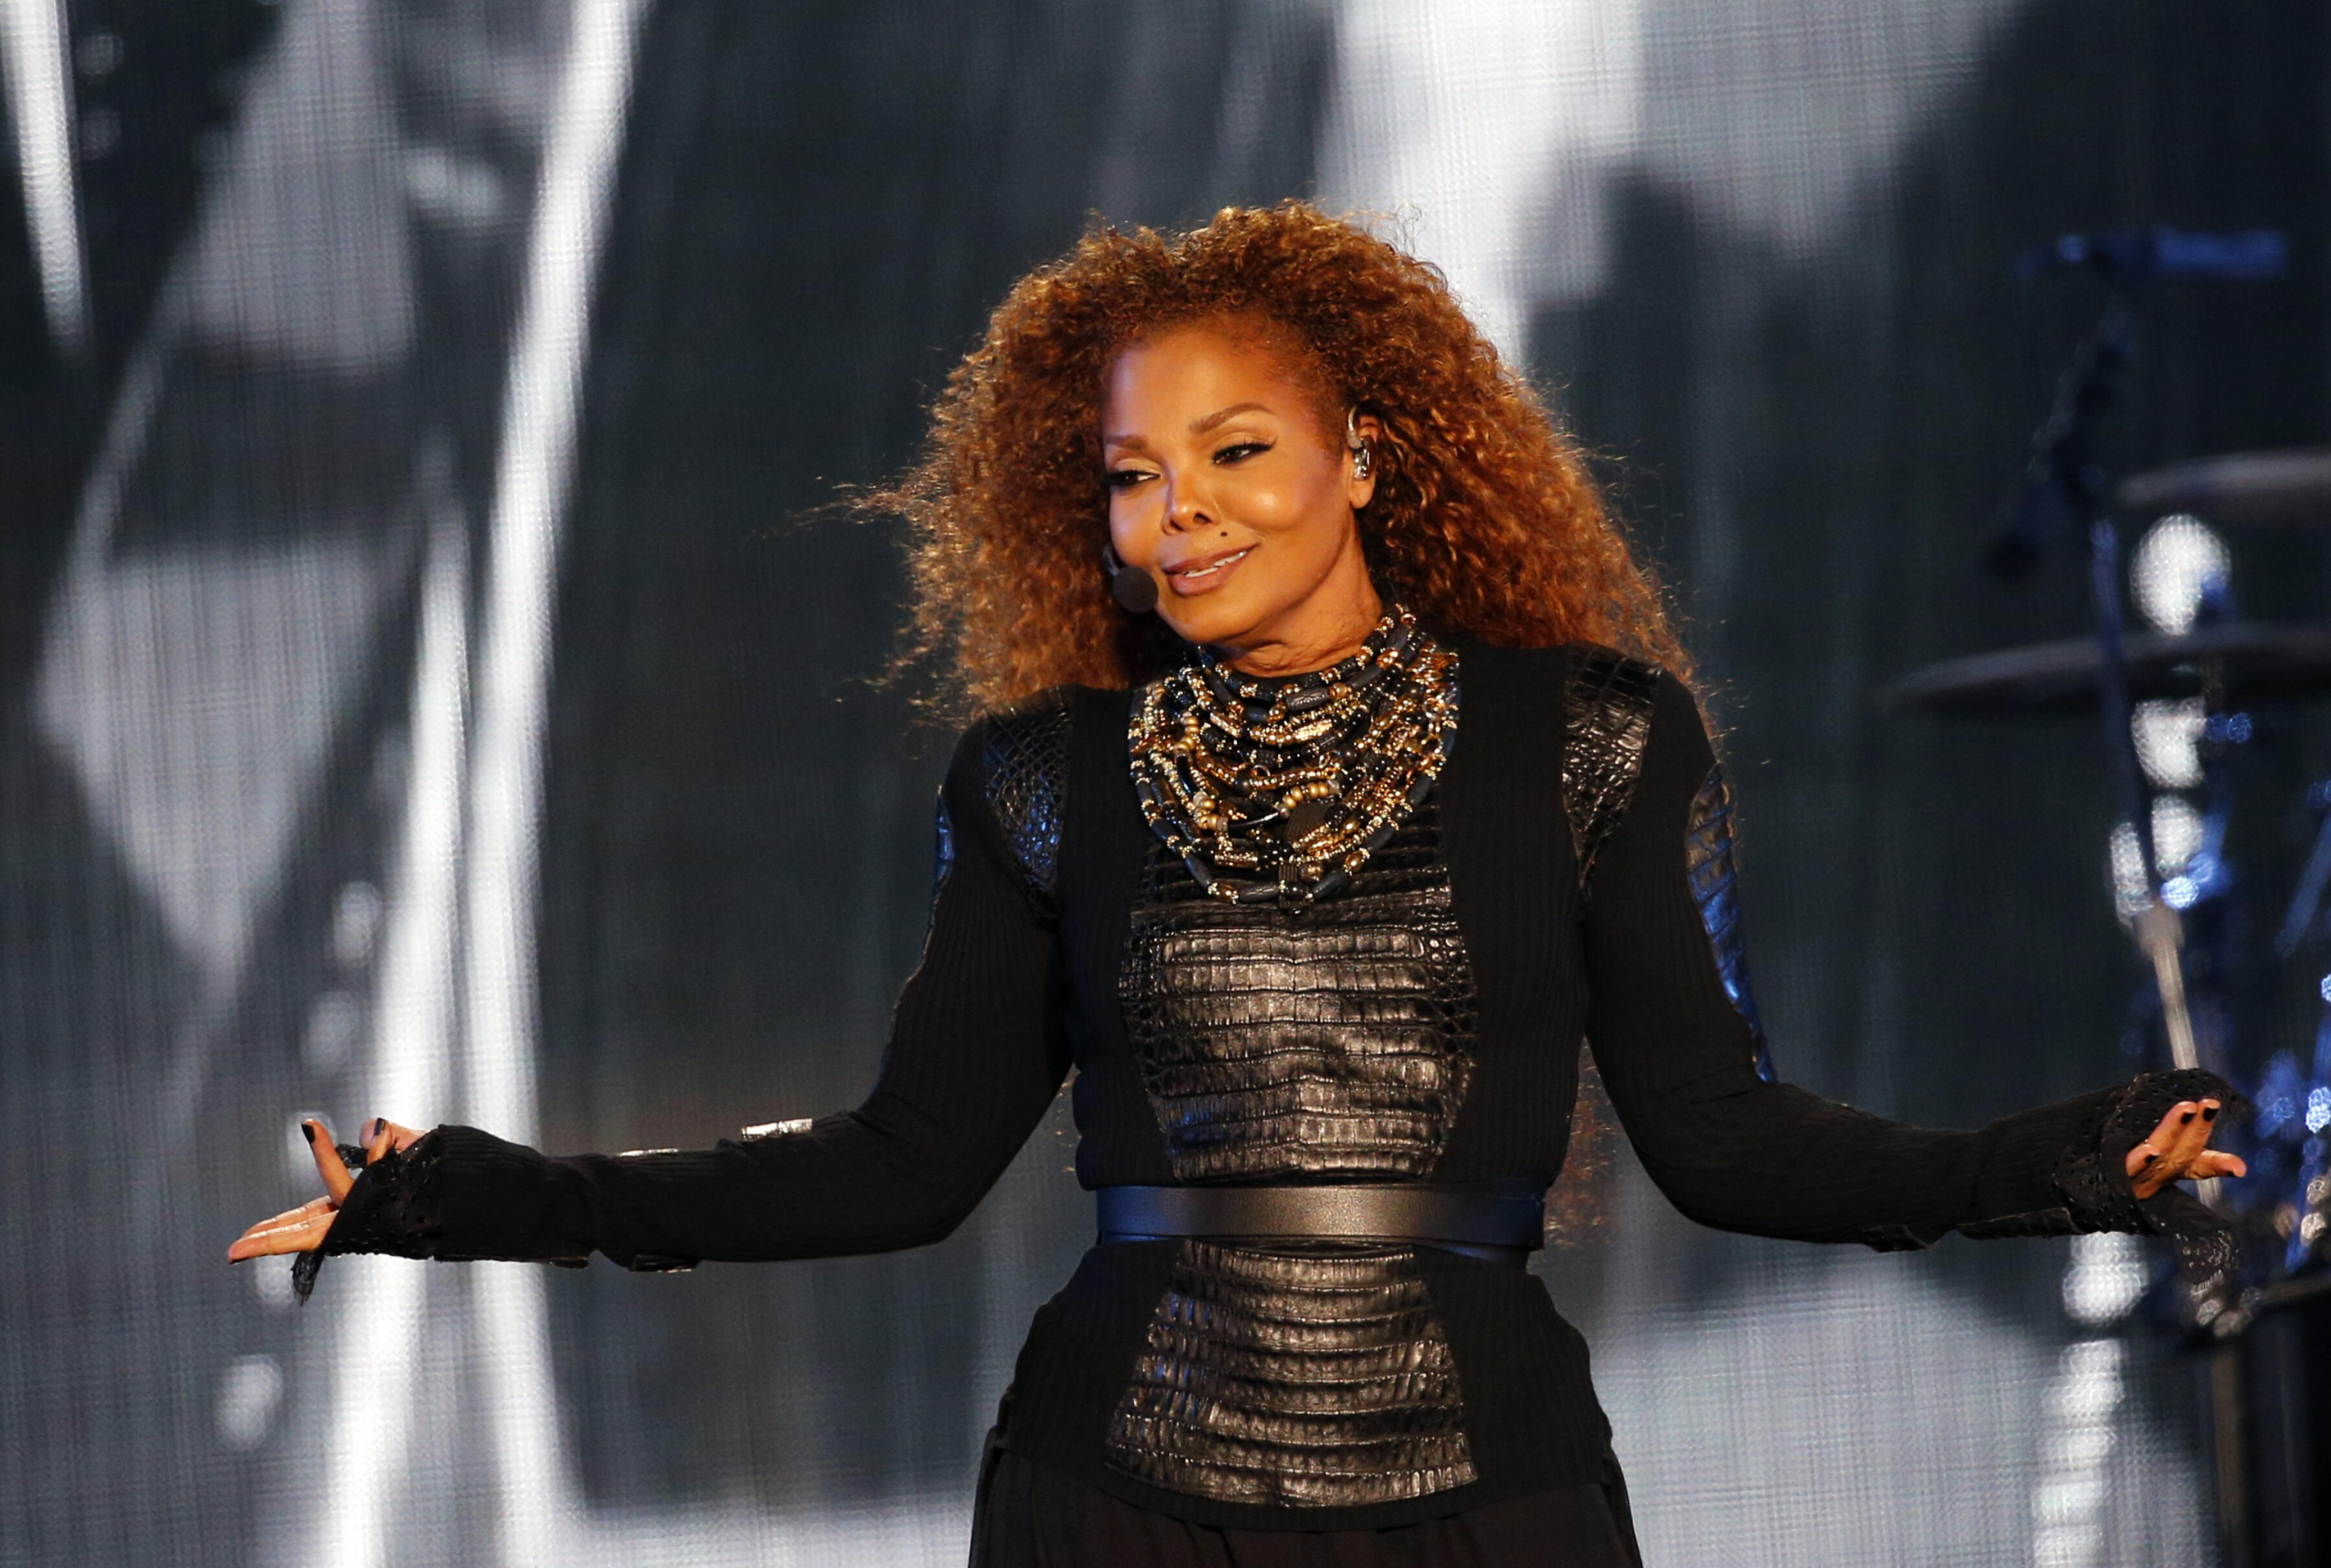 US singer Janet Jackson performs during the Dubai World Cup horse racing event on March 26, 2016 at the Meydan racecourse in the United Arab Emirate of Dubai. Janet Jackson returned to the stage after a four-month hiatus for mysterious health reasons, bri